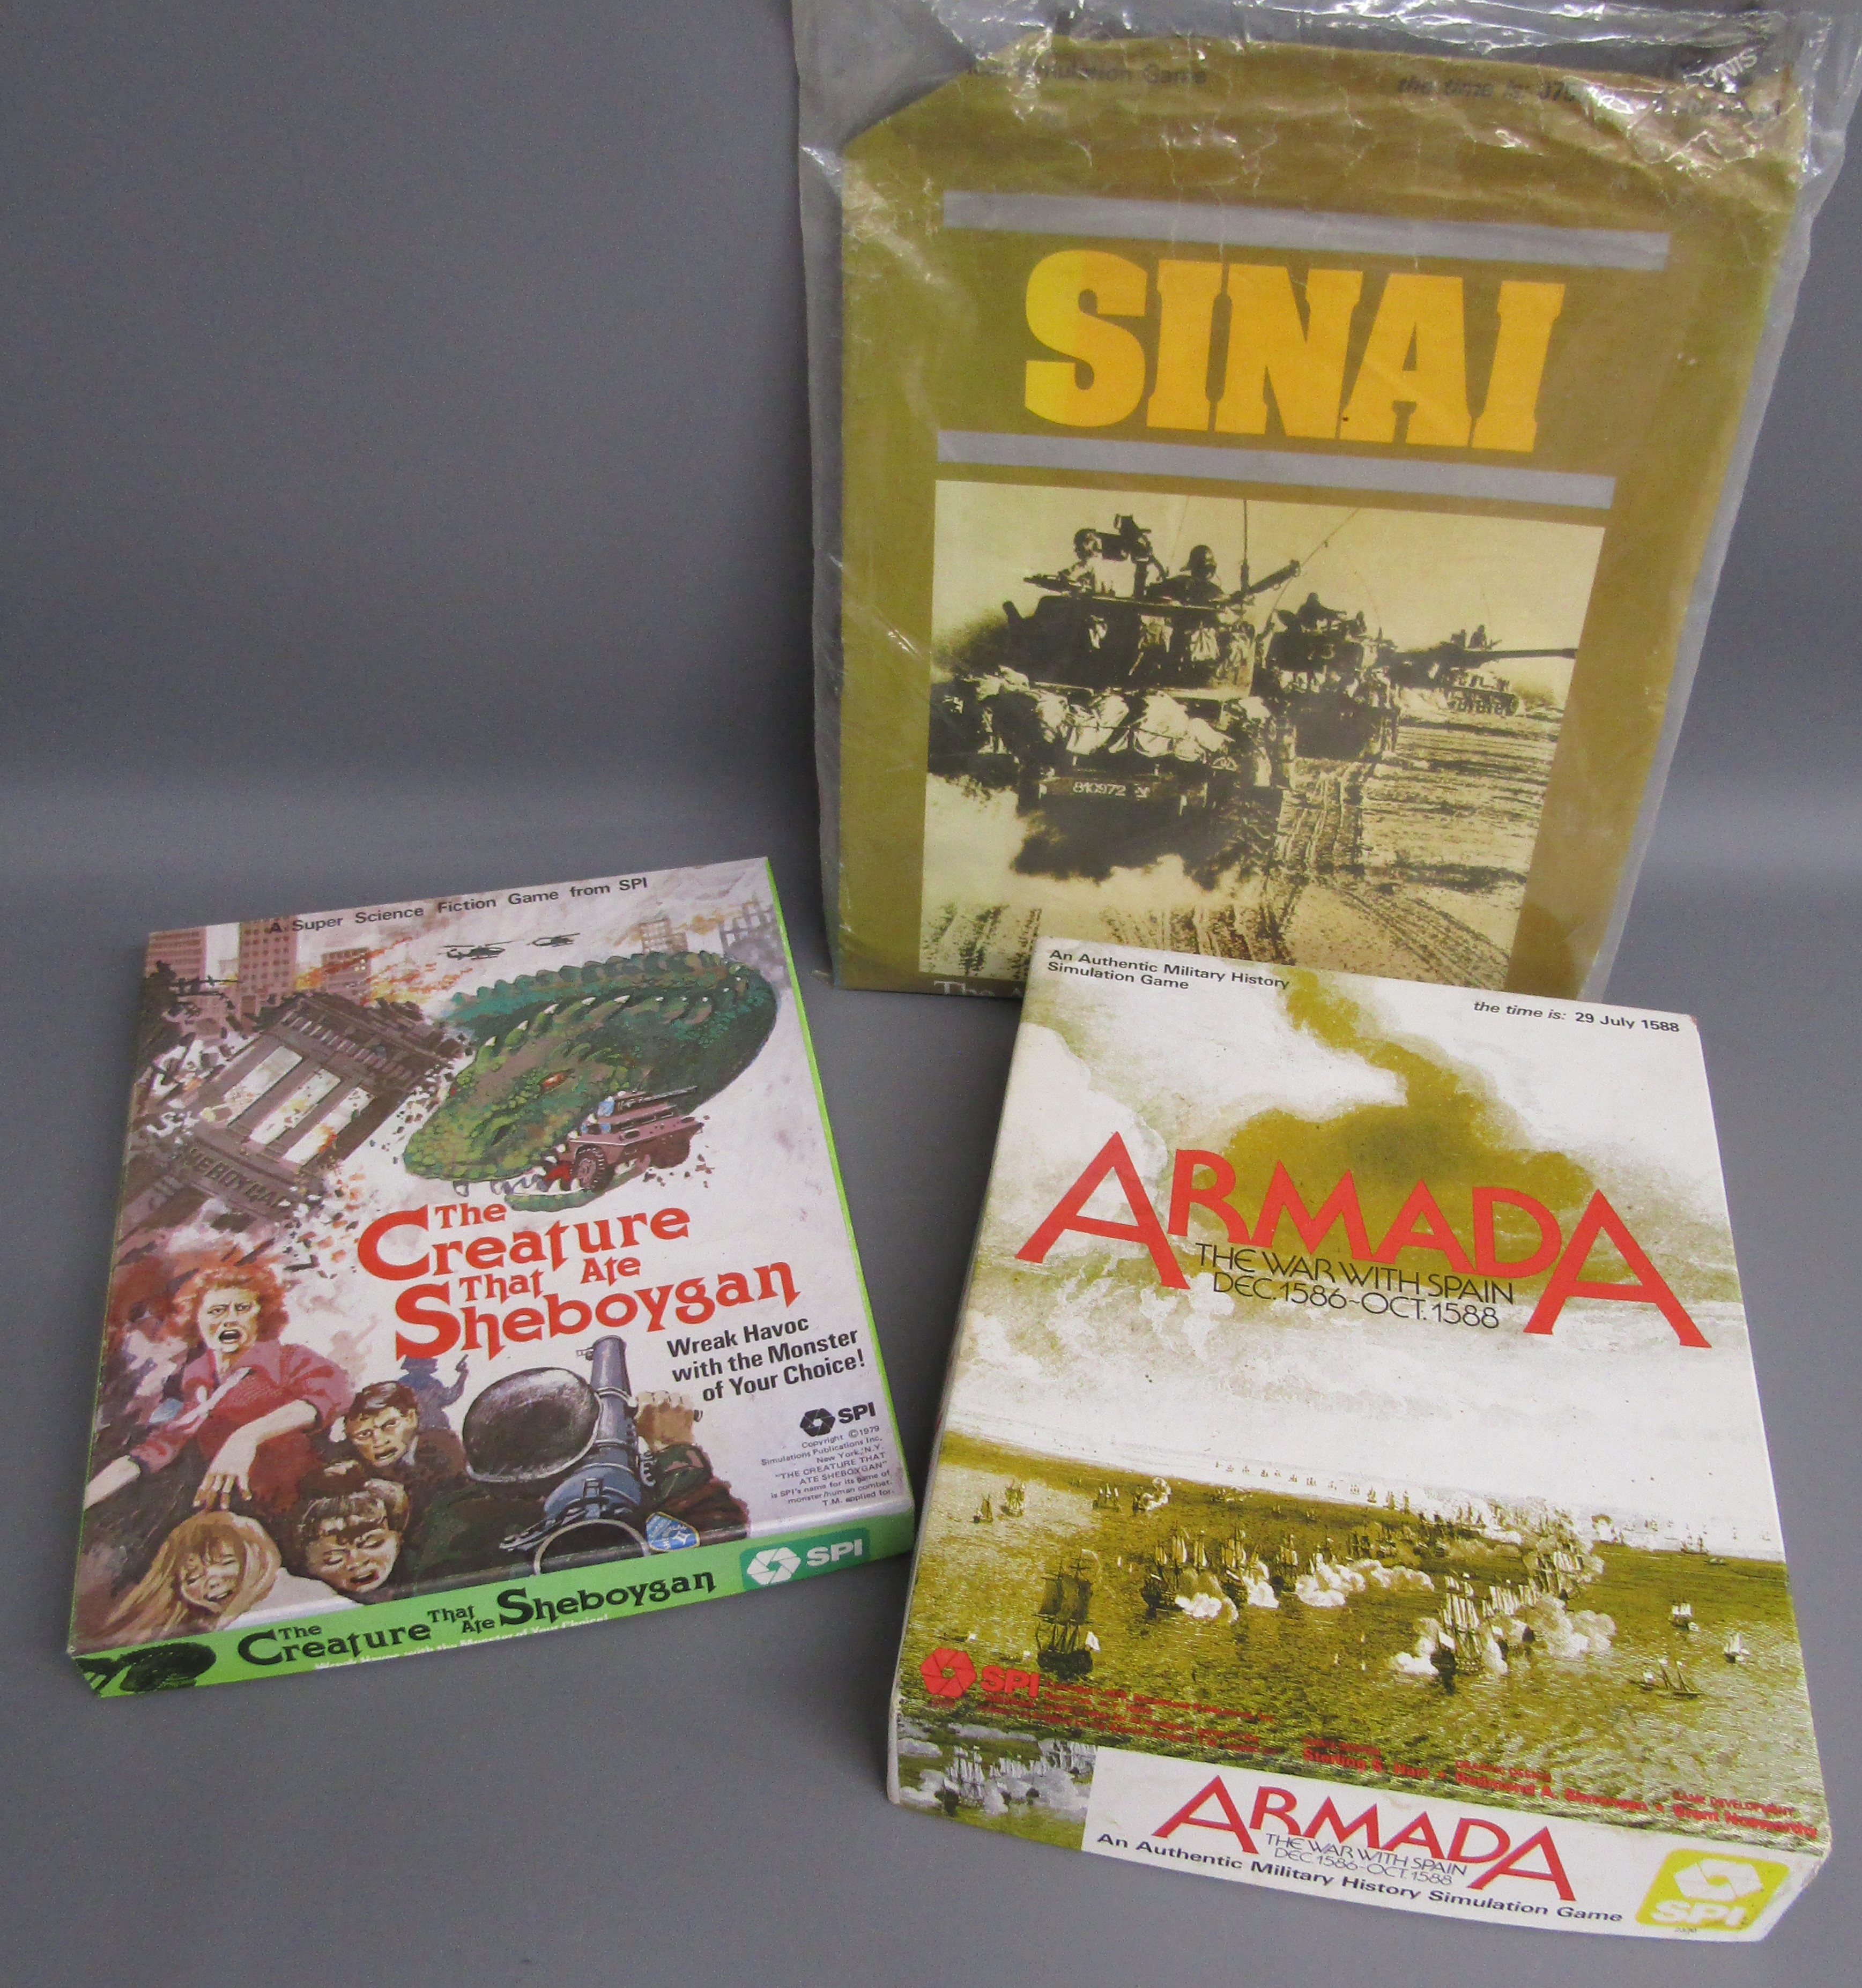 SPI games - Armada The War with Spain Dec.1586-Oct. 1588 - The Creature that ate Sheboygan - Sinai